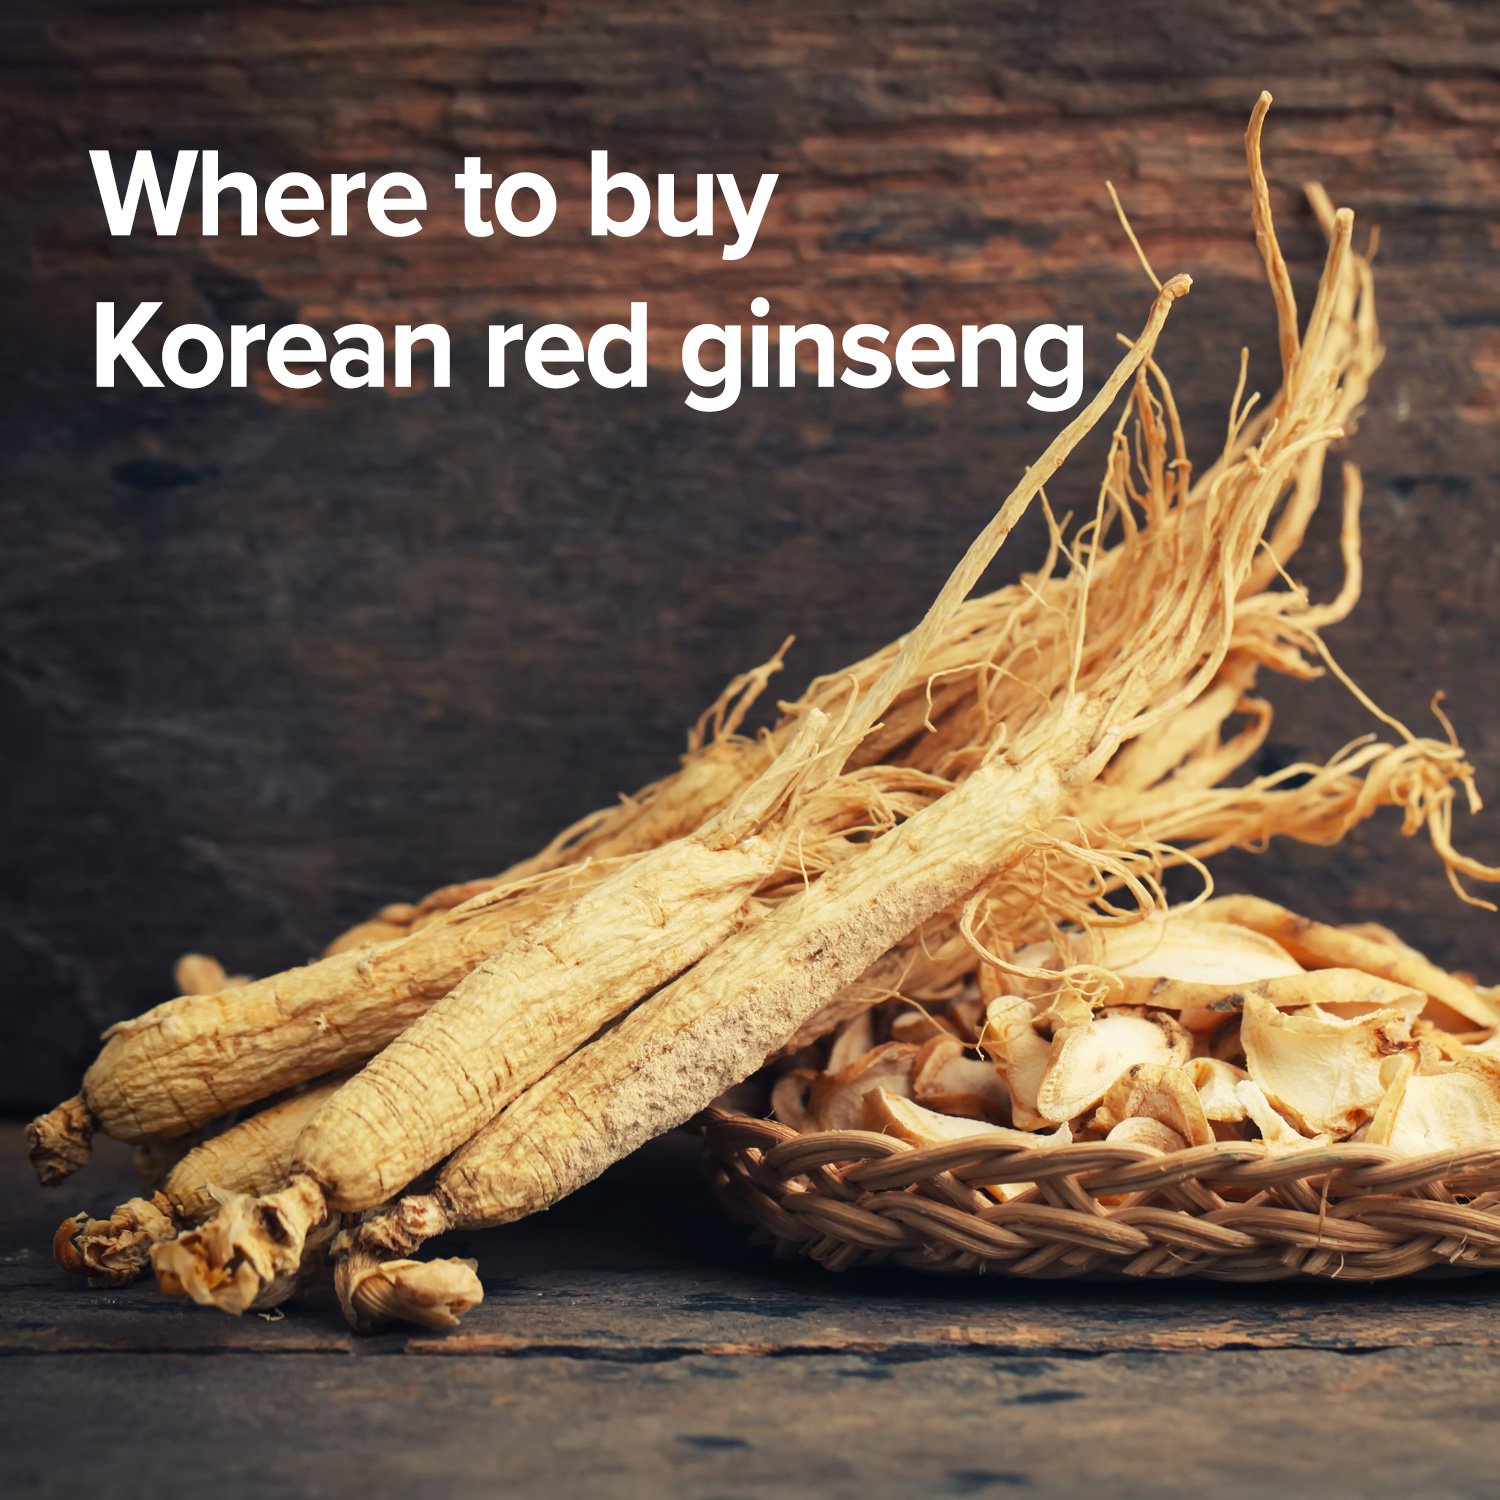 where to buy korean red ginseng